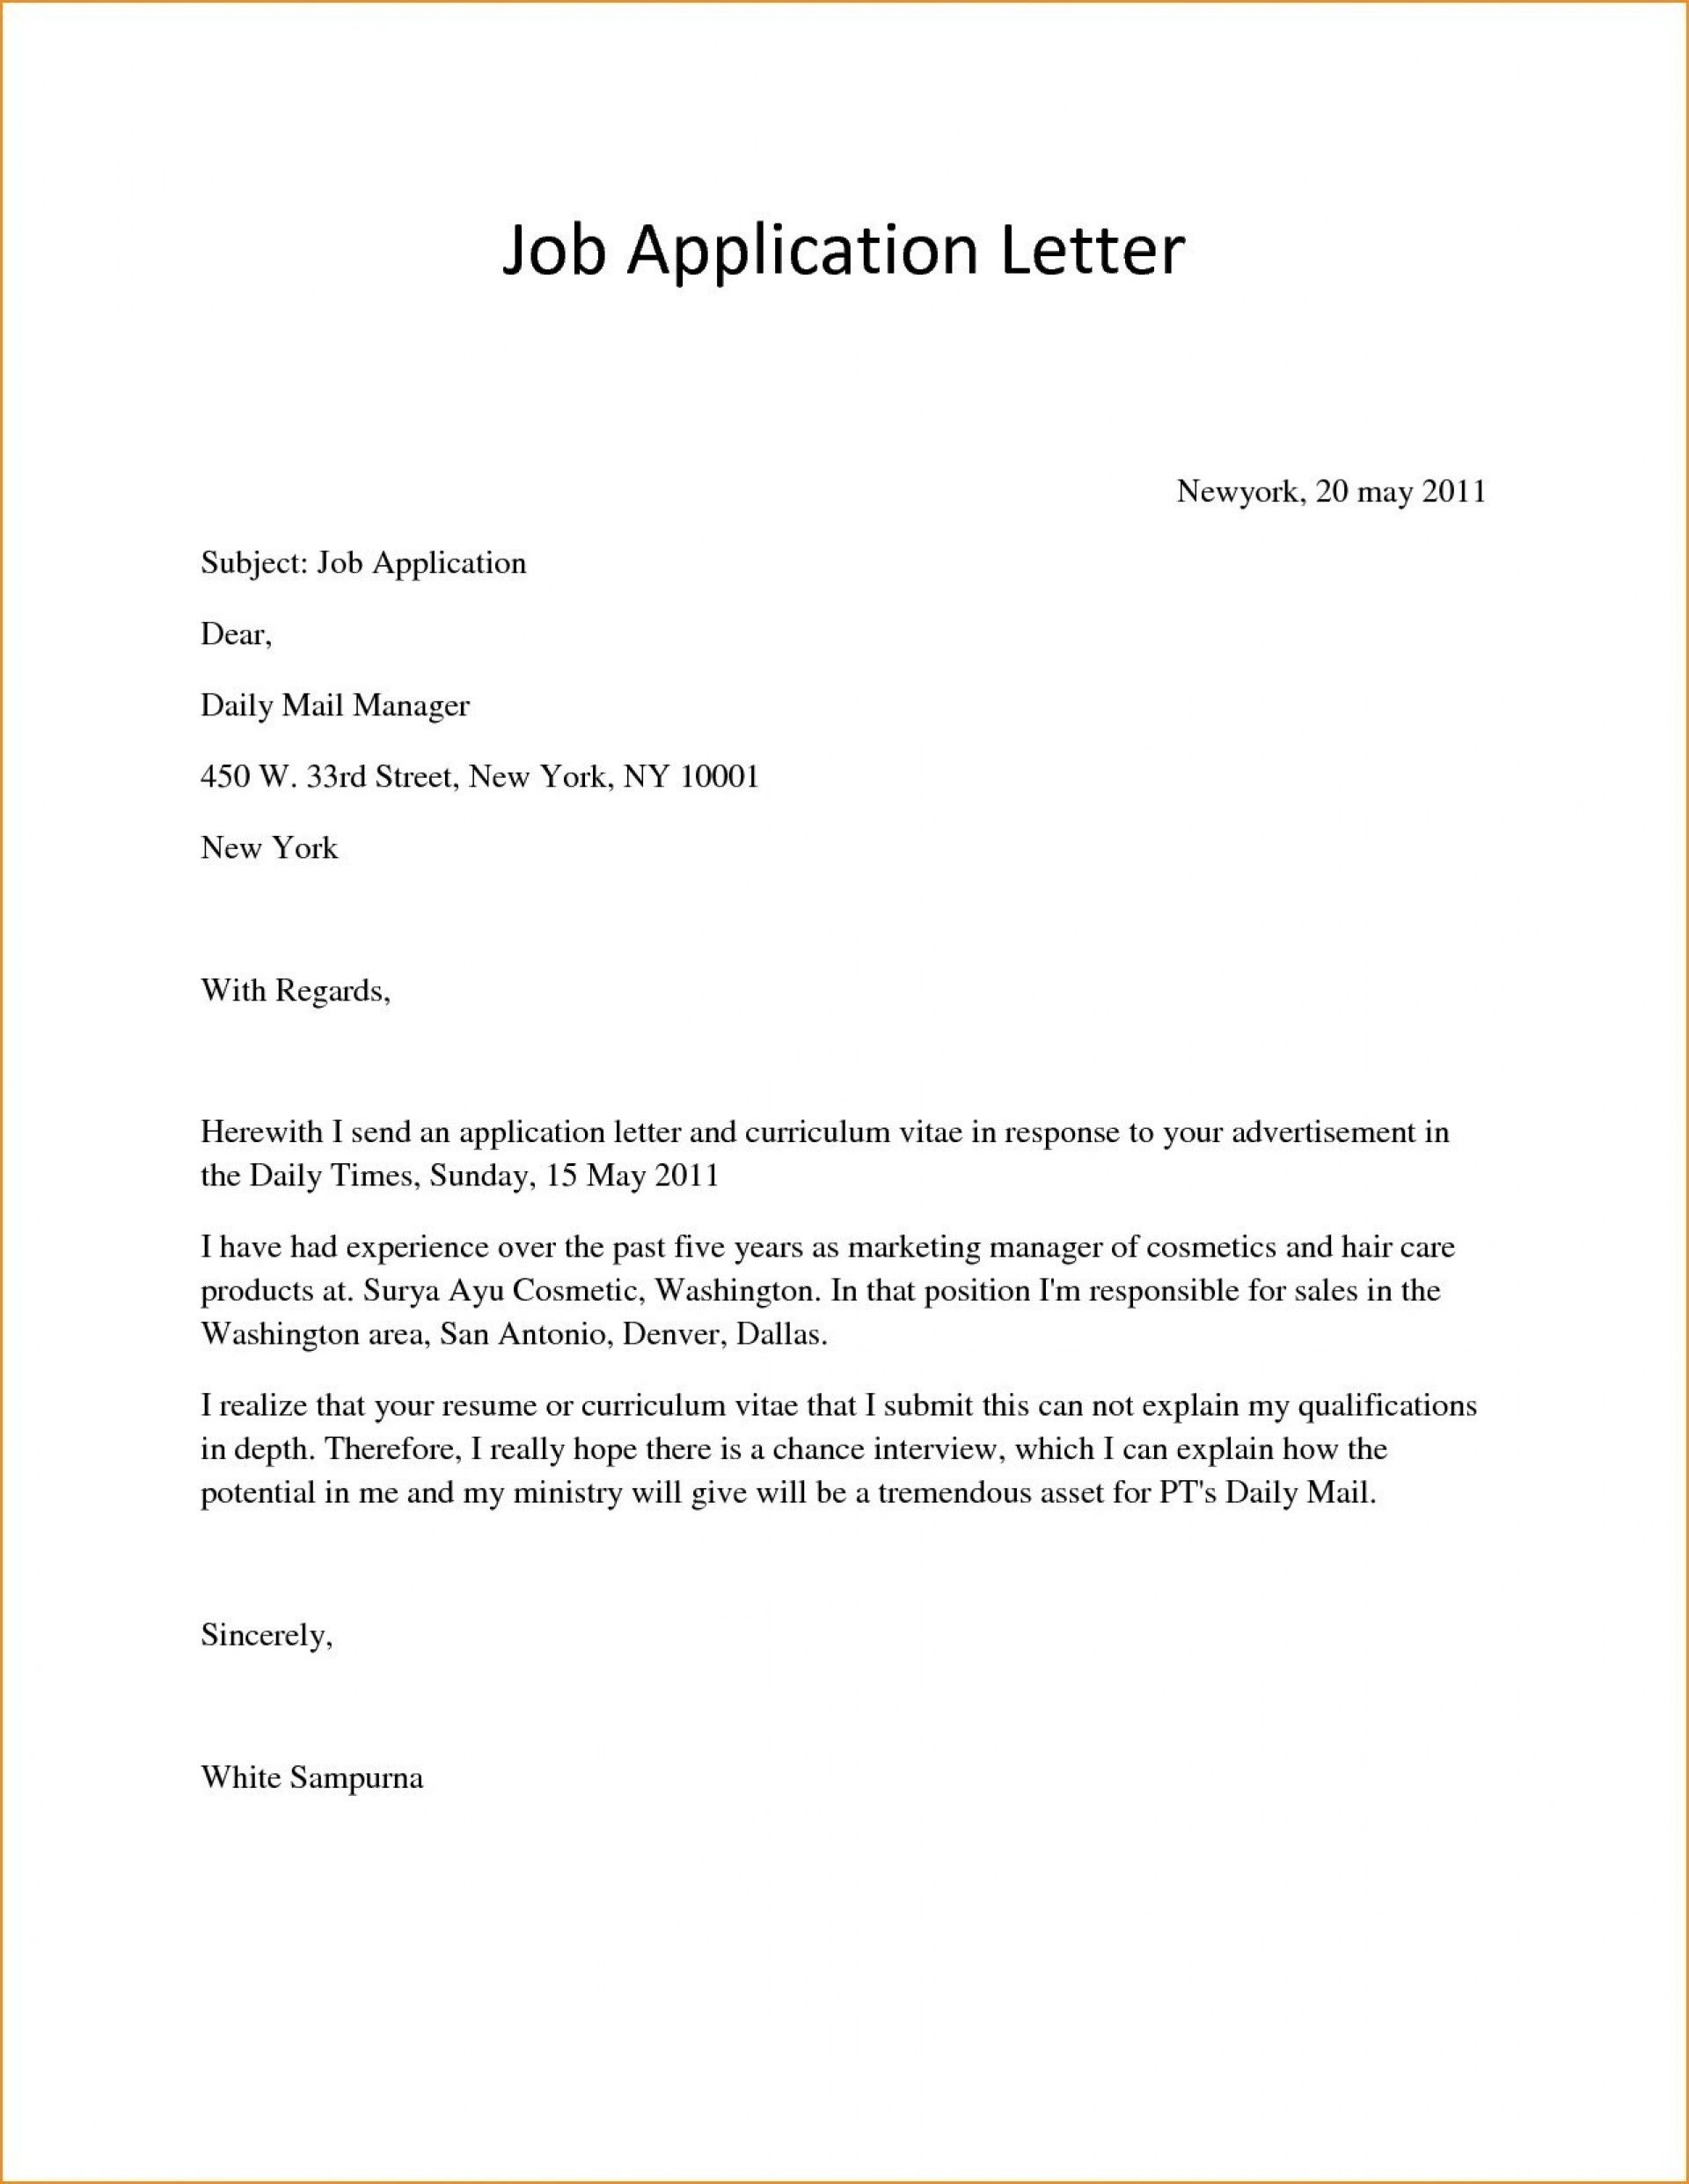 Personal Letter For Job Application